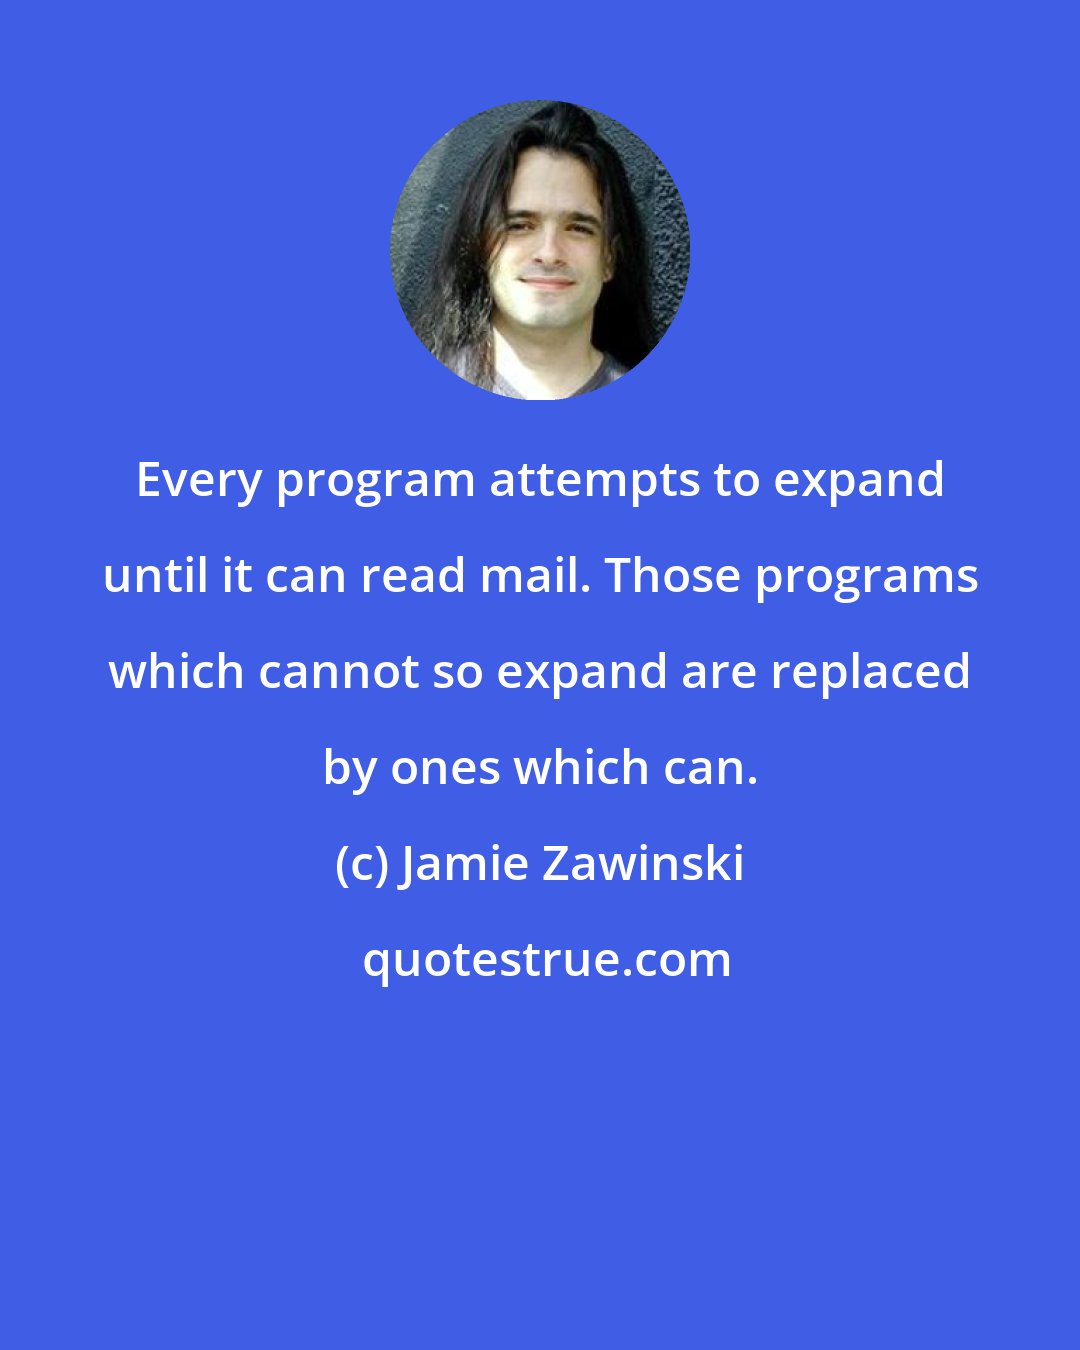 Jamie Zawinski: Every program attempts to expand until it can read mail. Those programs which cannot so expand are replaced by ones which can.